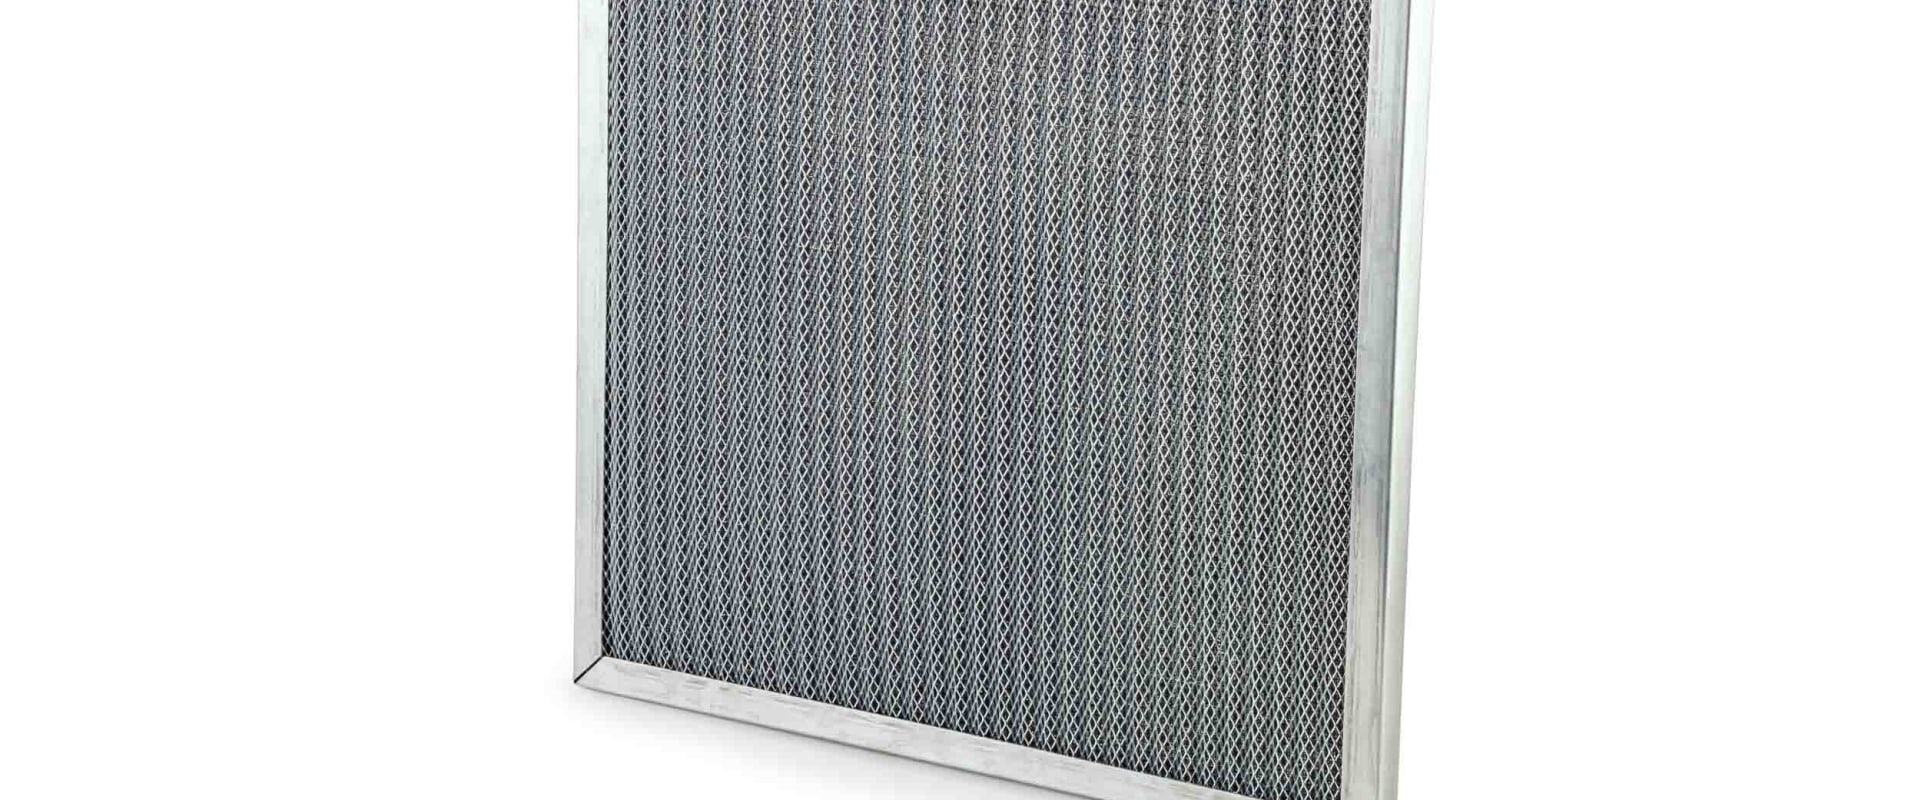 The Benefits of Using an Electrostatic 20 x 20 x 1 Air Filter in Your Home